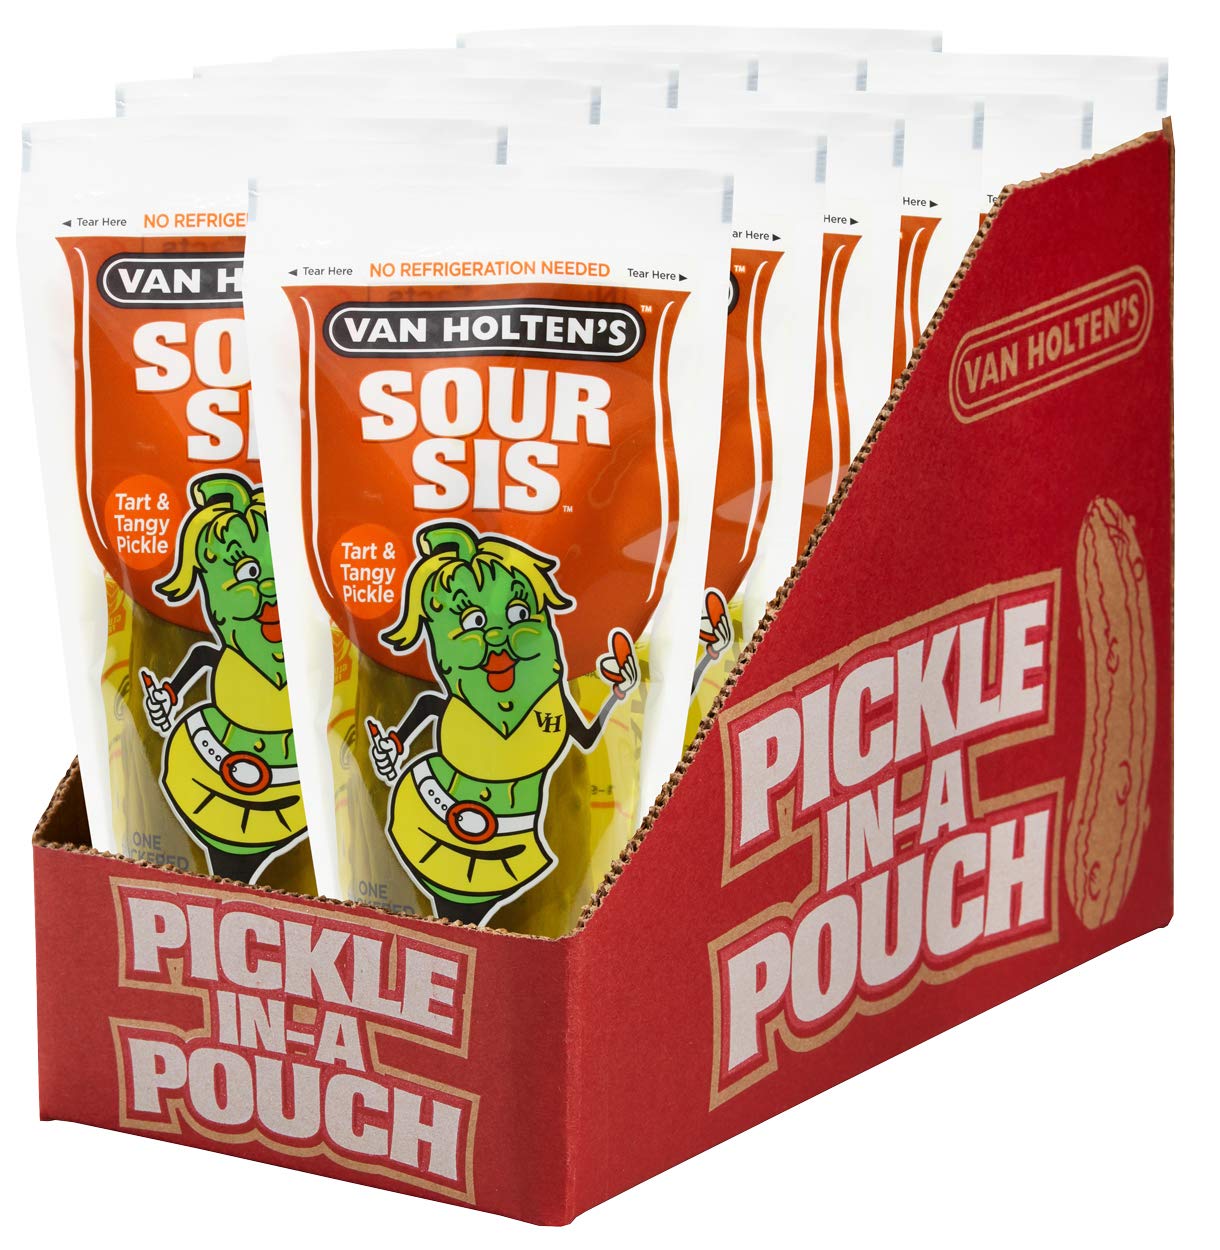 Van Holten's Pickles - Jumbo Pickle-In-A-Pouch - 12 Pack - Multiple Flavours - Wholesale